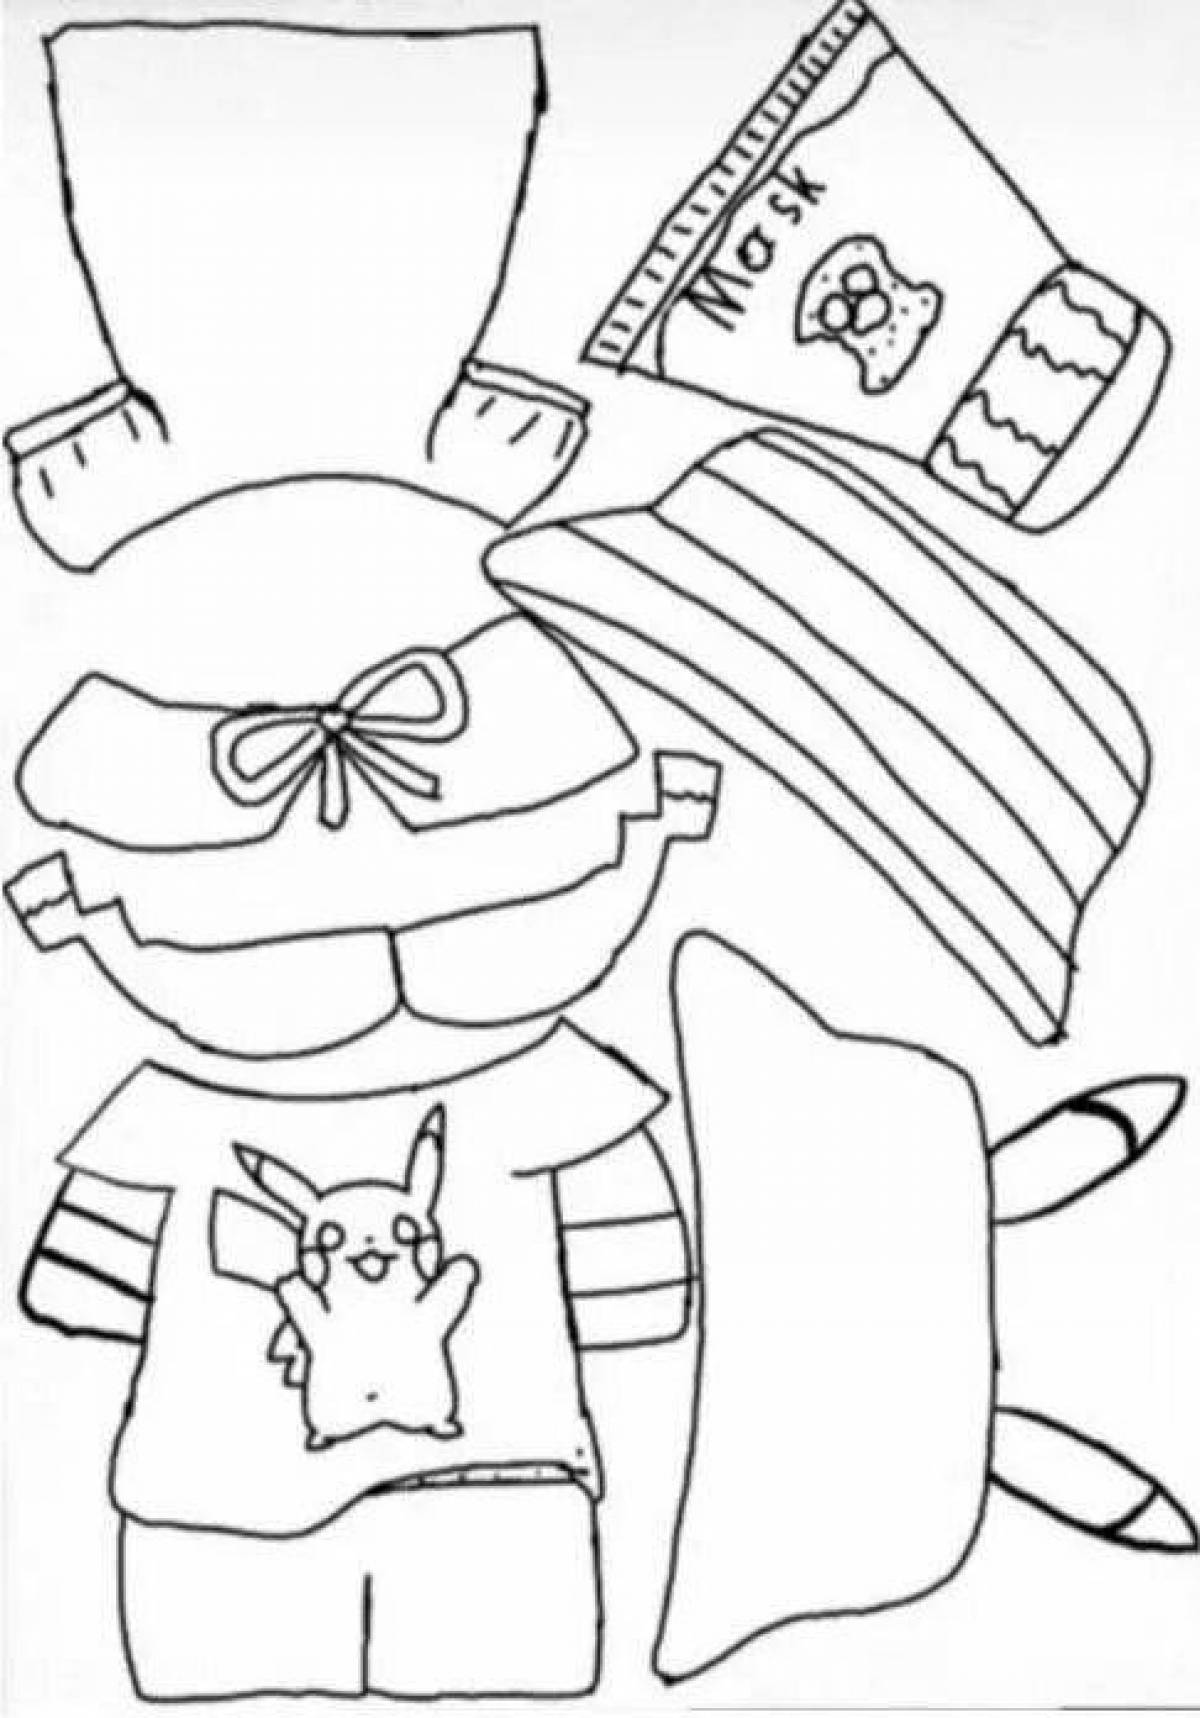 Colorful dressed duck coloring page